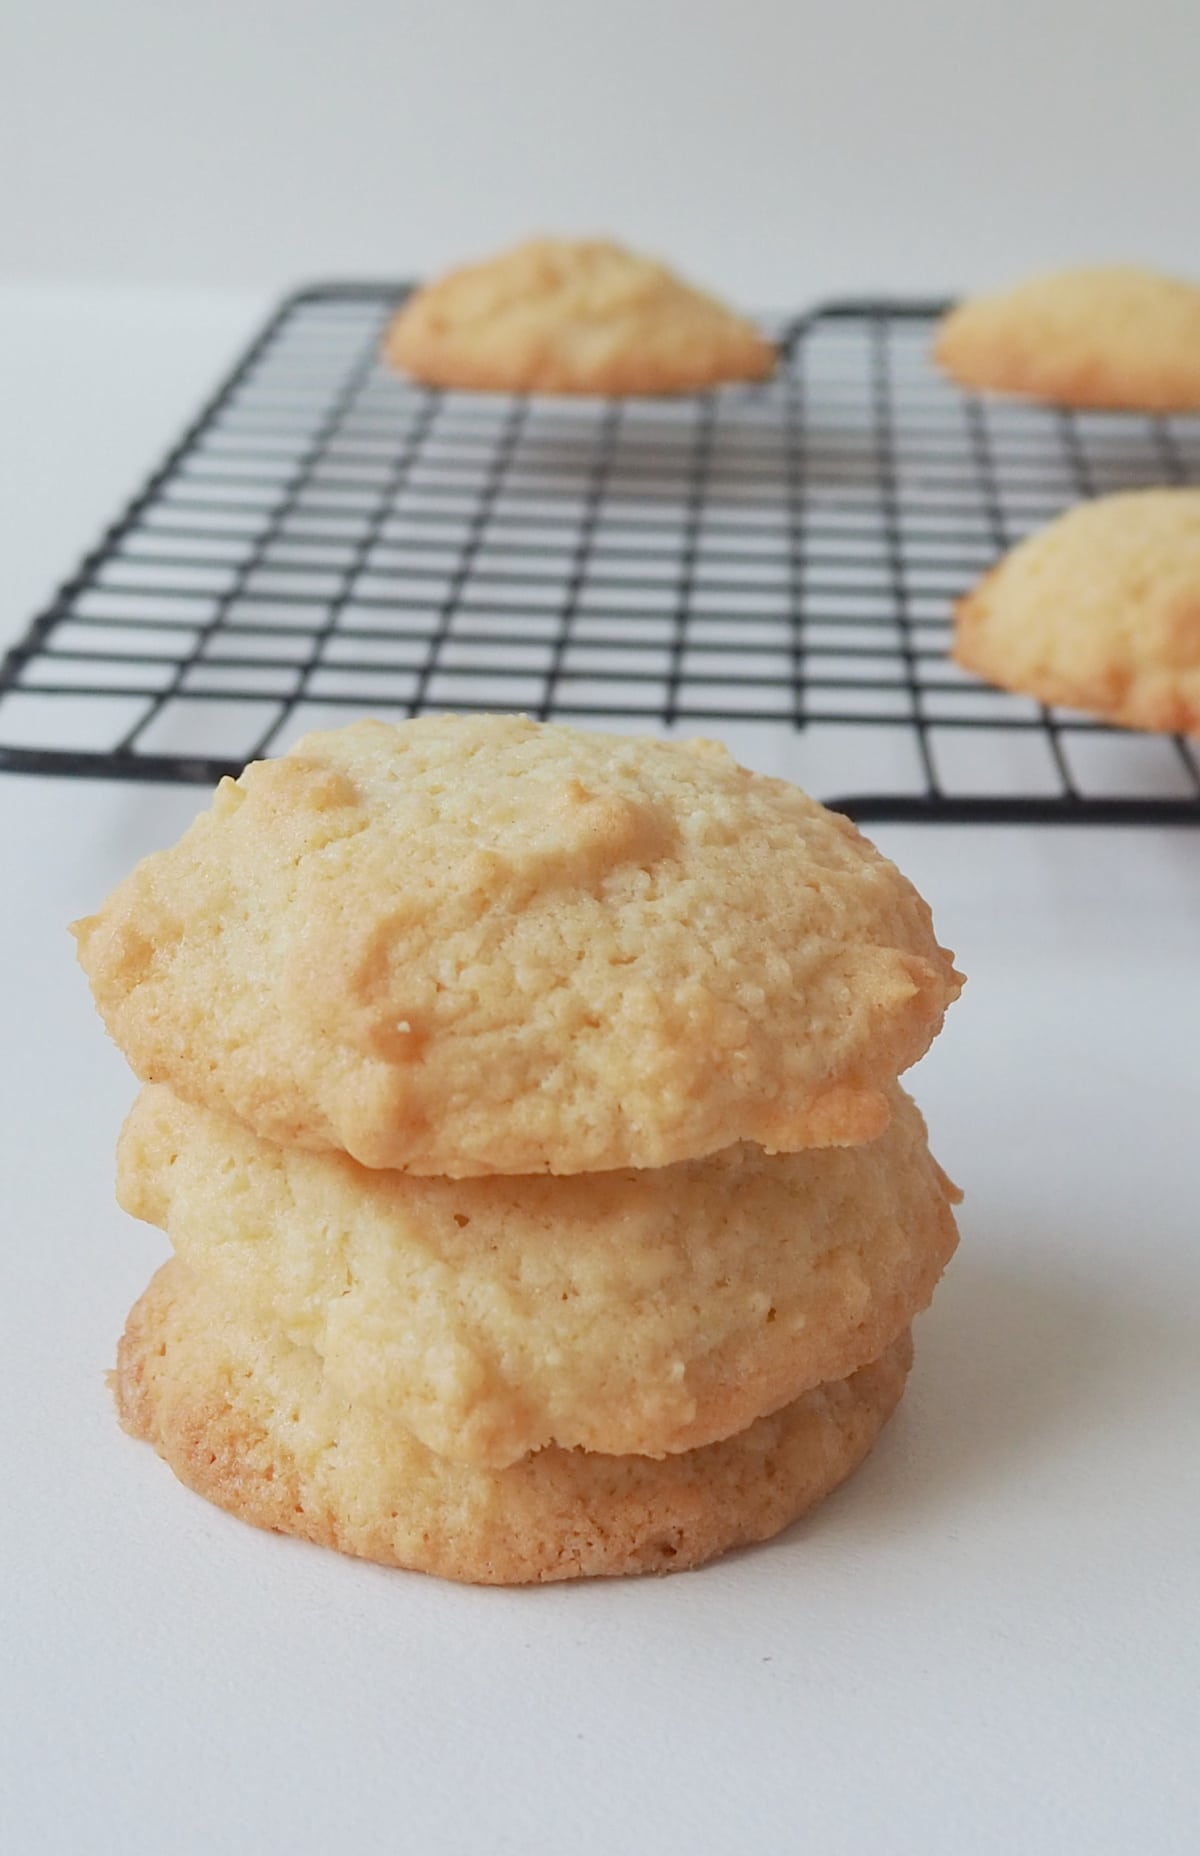 Three coconut biscuits made in a thermomix stacked on top of each other. In the background there is a wire rack with more biscuits on it.